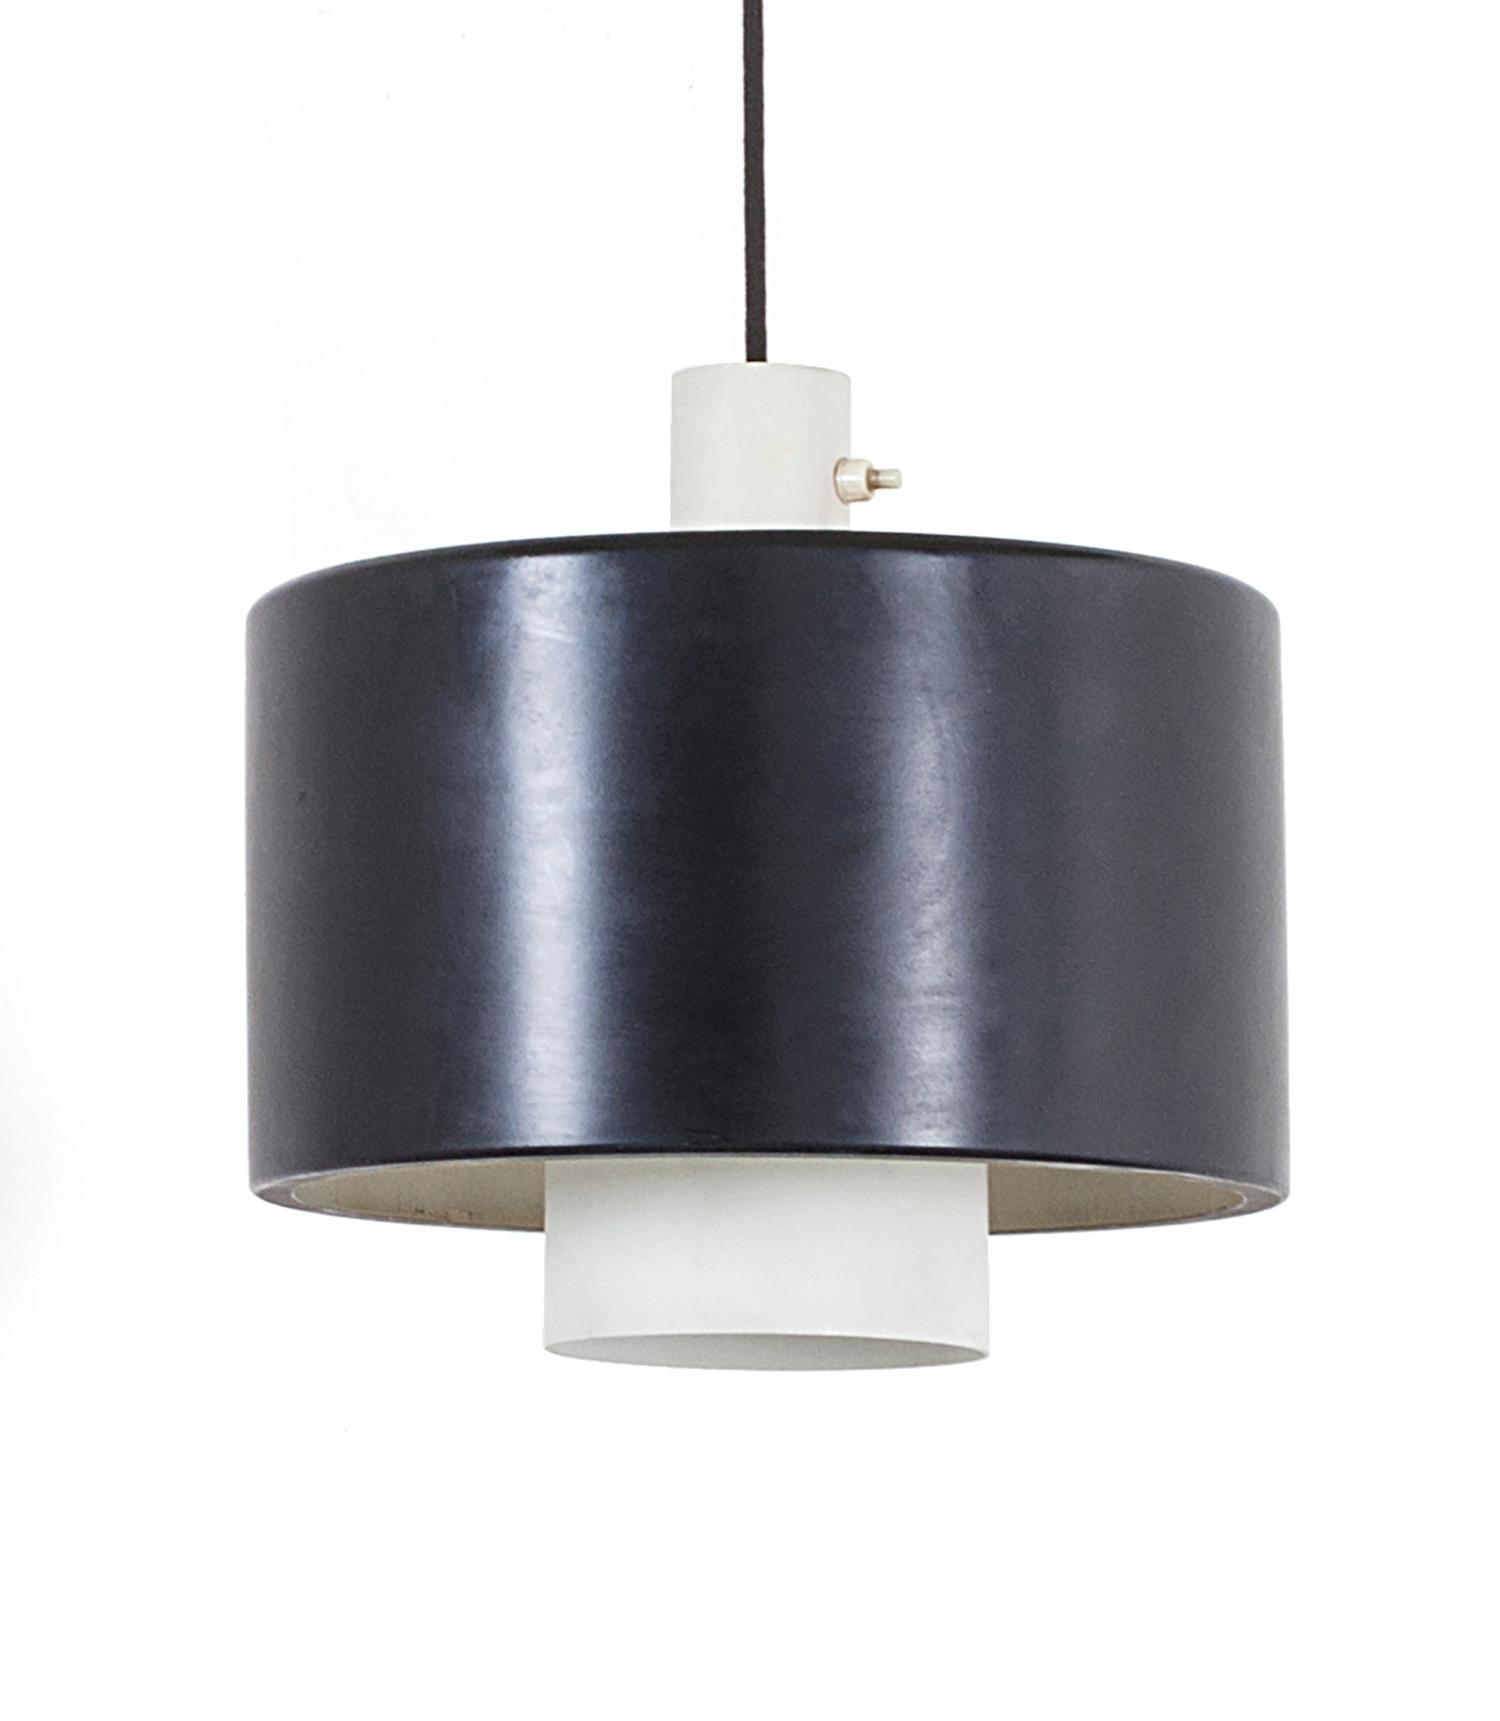 Stilnovo wall light model 2061, Italy, circa 1957. Wall-mounted counterbalance swingarm lamp with brass arm, black enameled metal shade, and counterbalance pulley mechanism for raising and lowering the shade. Signed on backplate 'stilnovo